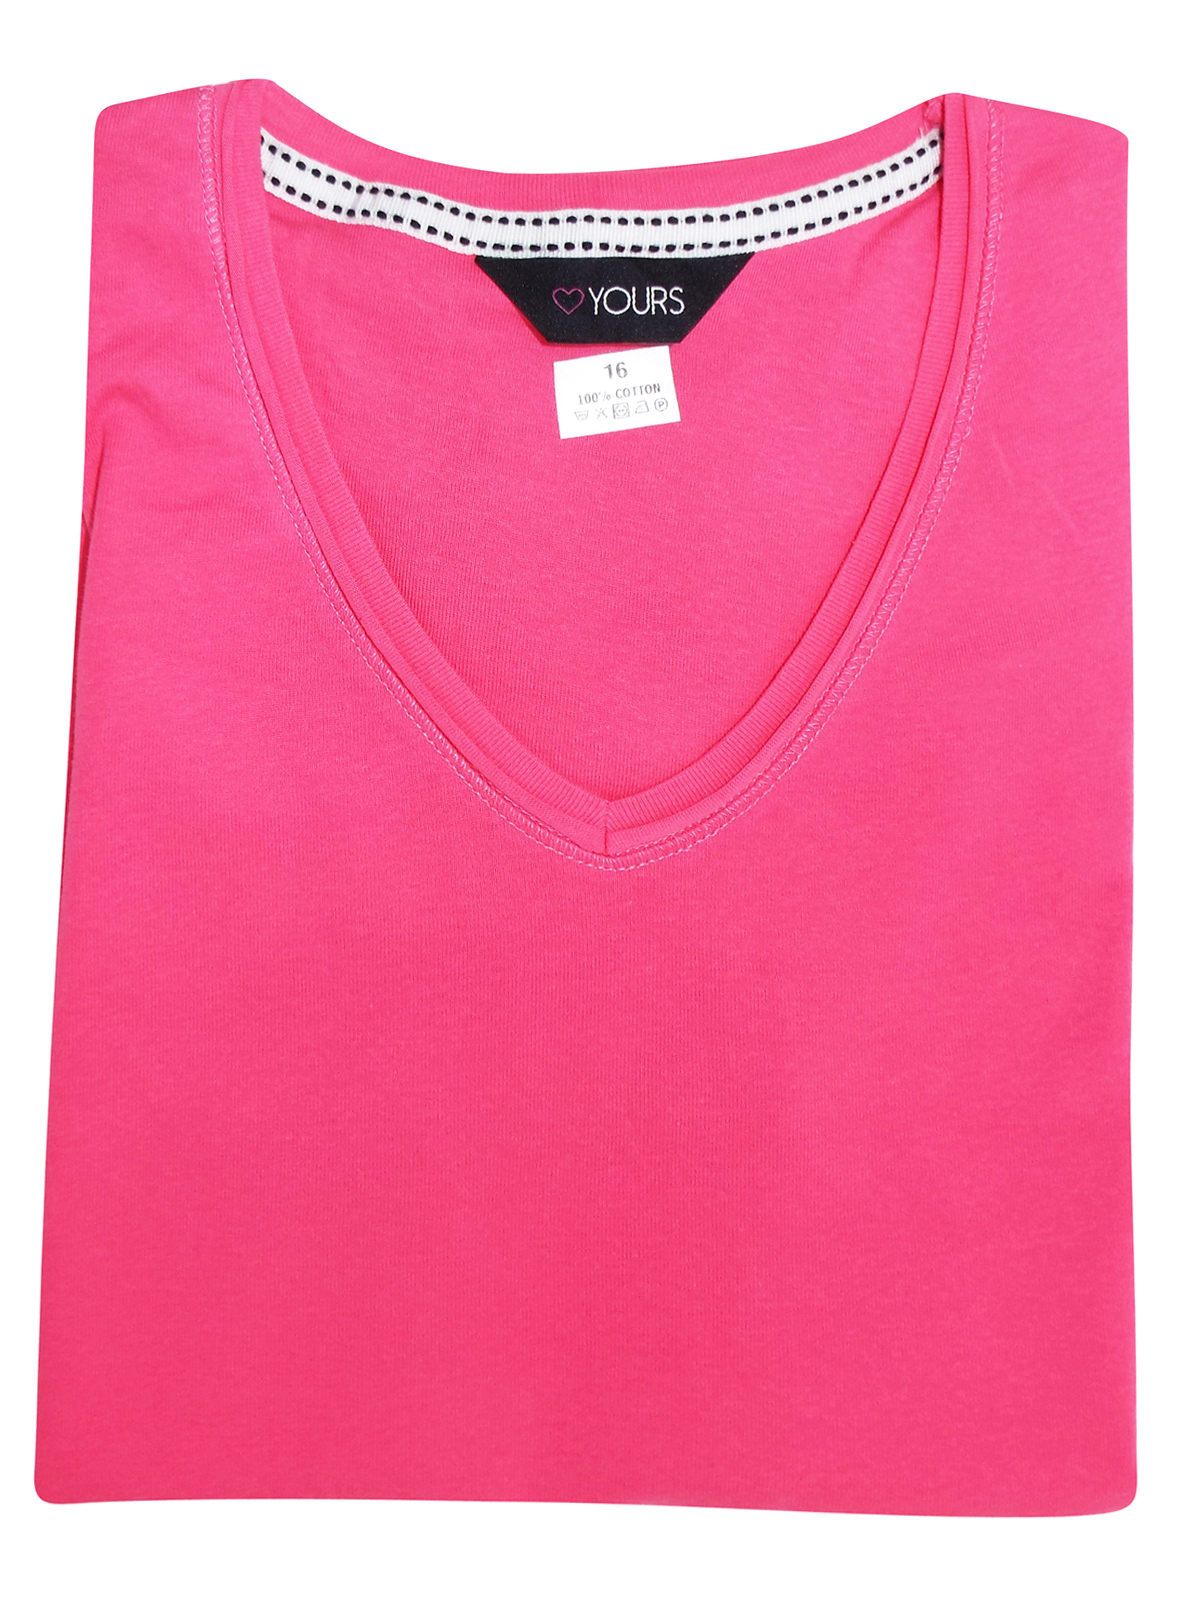 neon pink plus size shirt OFF53%